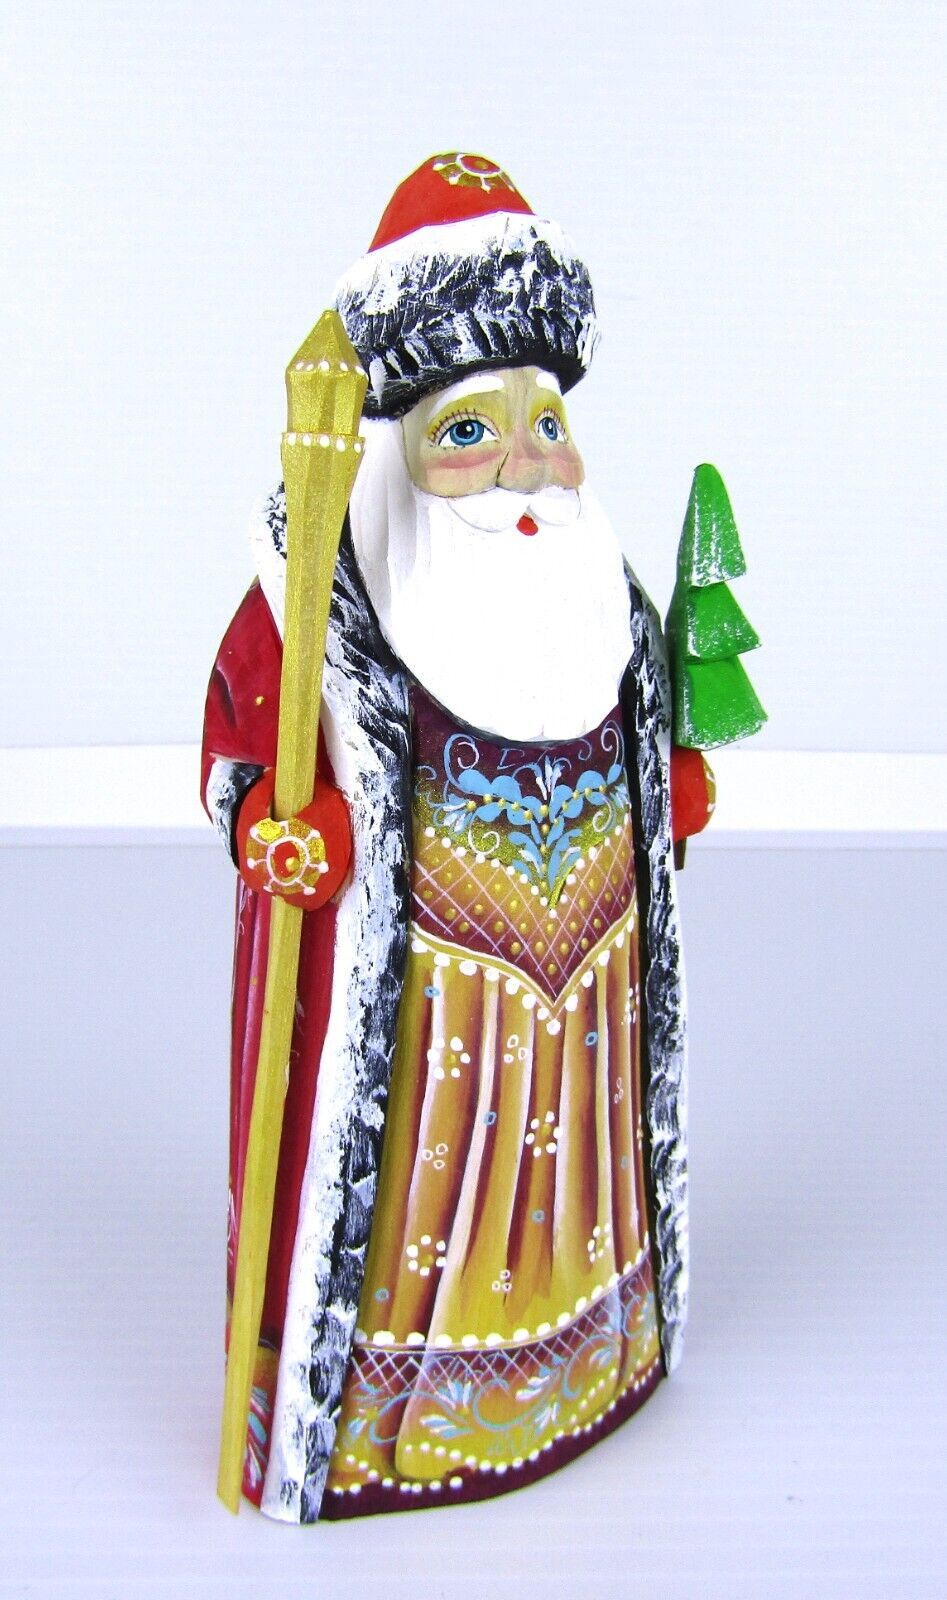 6" Russian Carved Santa Claus Red Figure Tree Staff Hand Made Linden Christmas Без бренда